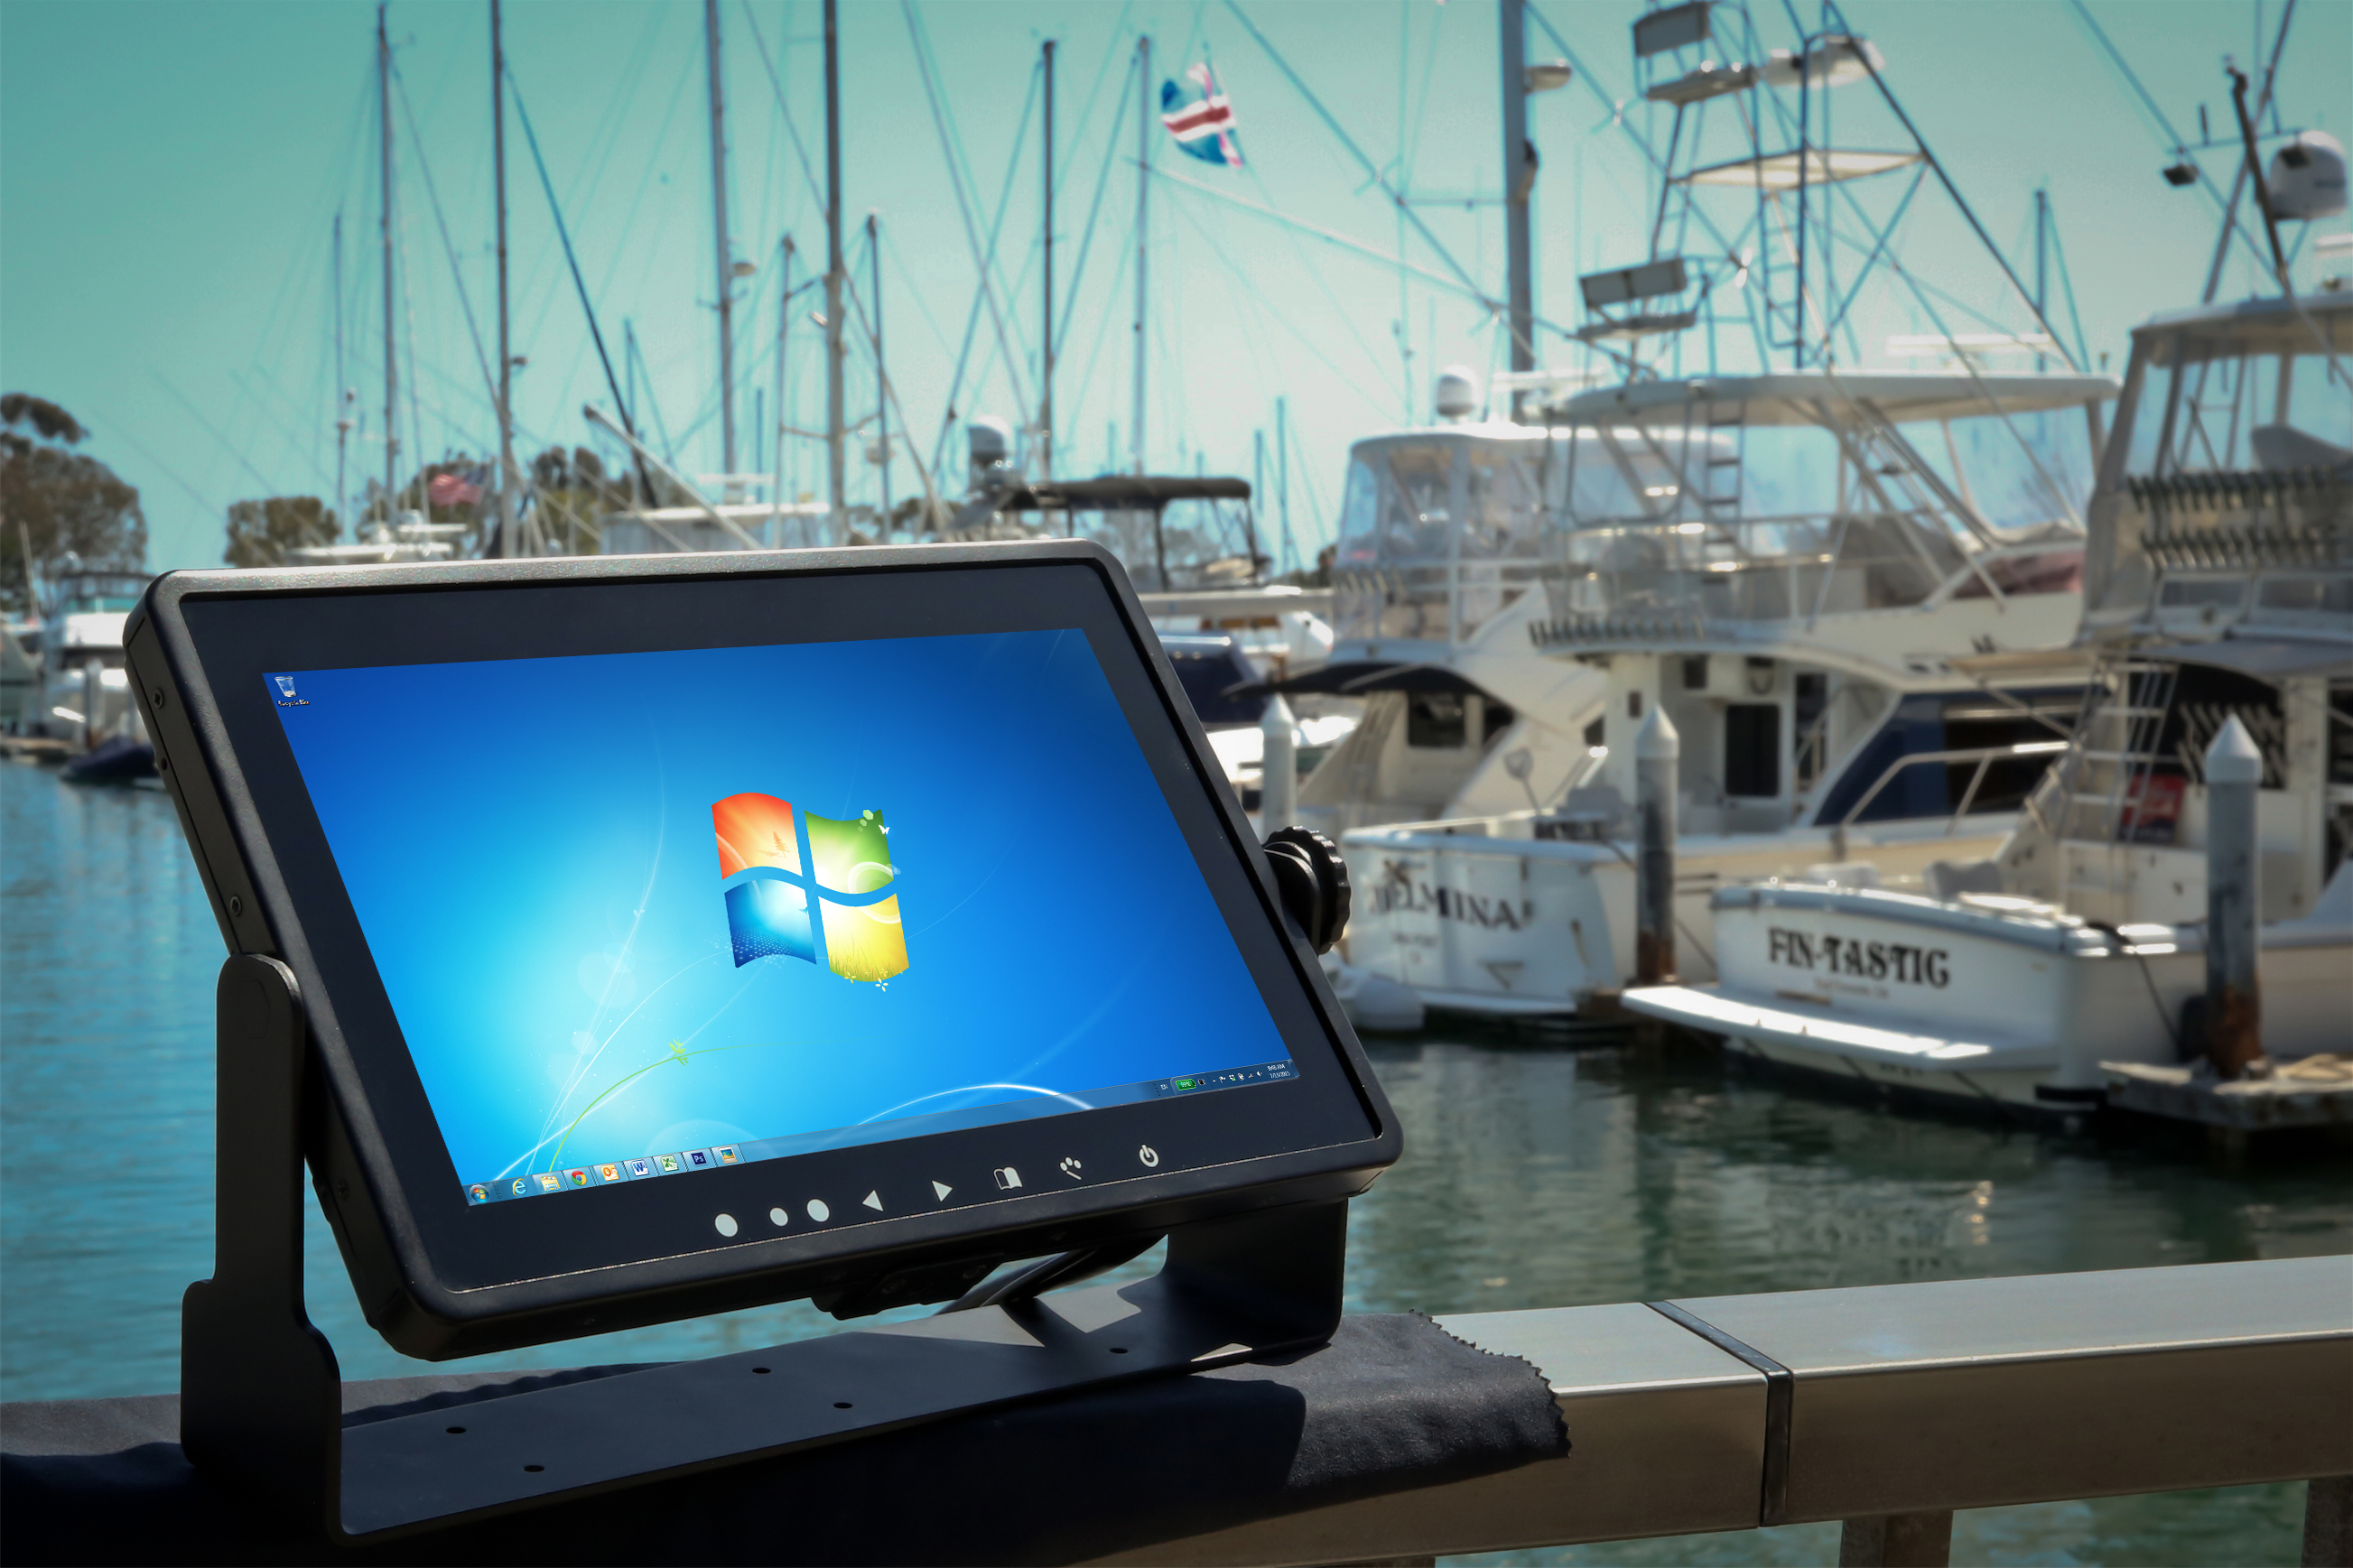 Ruggedized Marine Touch Screen Solutions for Watercraft Vessel & Commercial Vessel Manufacturers - 7",8",9",10",12",15",18",24" Small Marine-Grade Rugged LCD Touchscreen Monitor Solutions